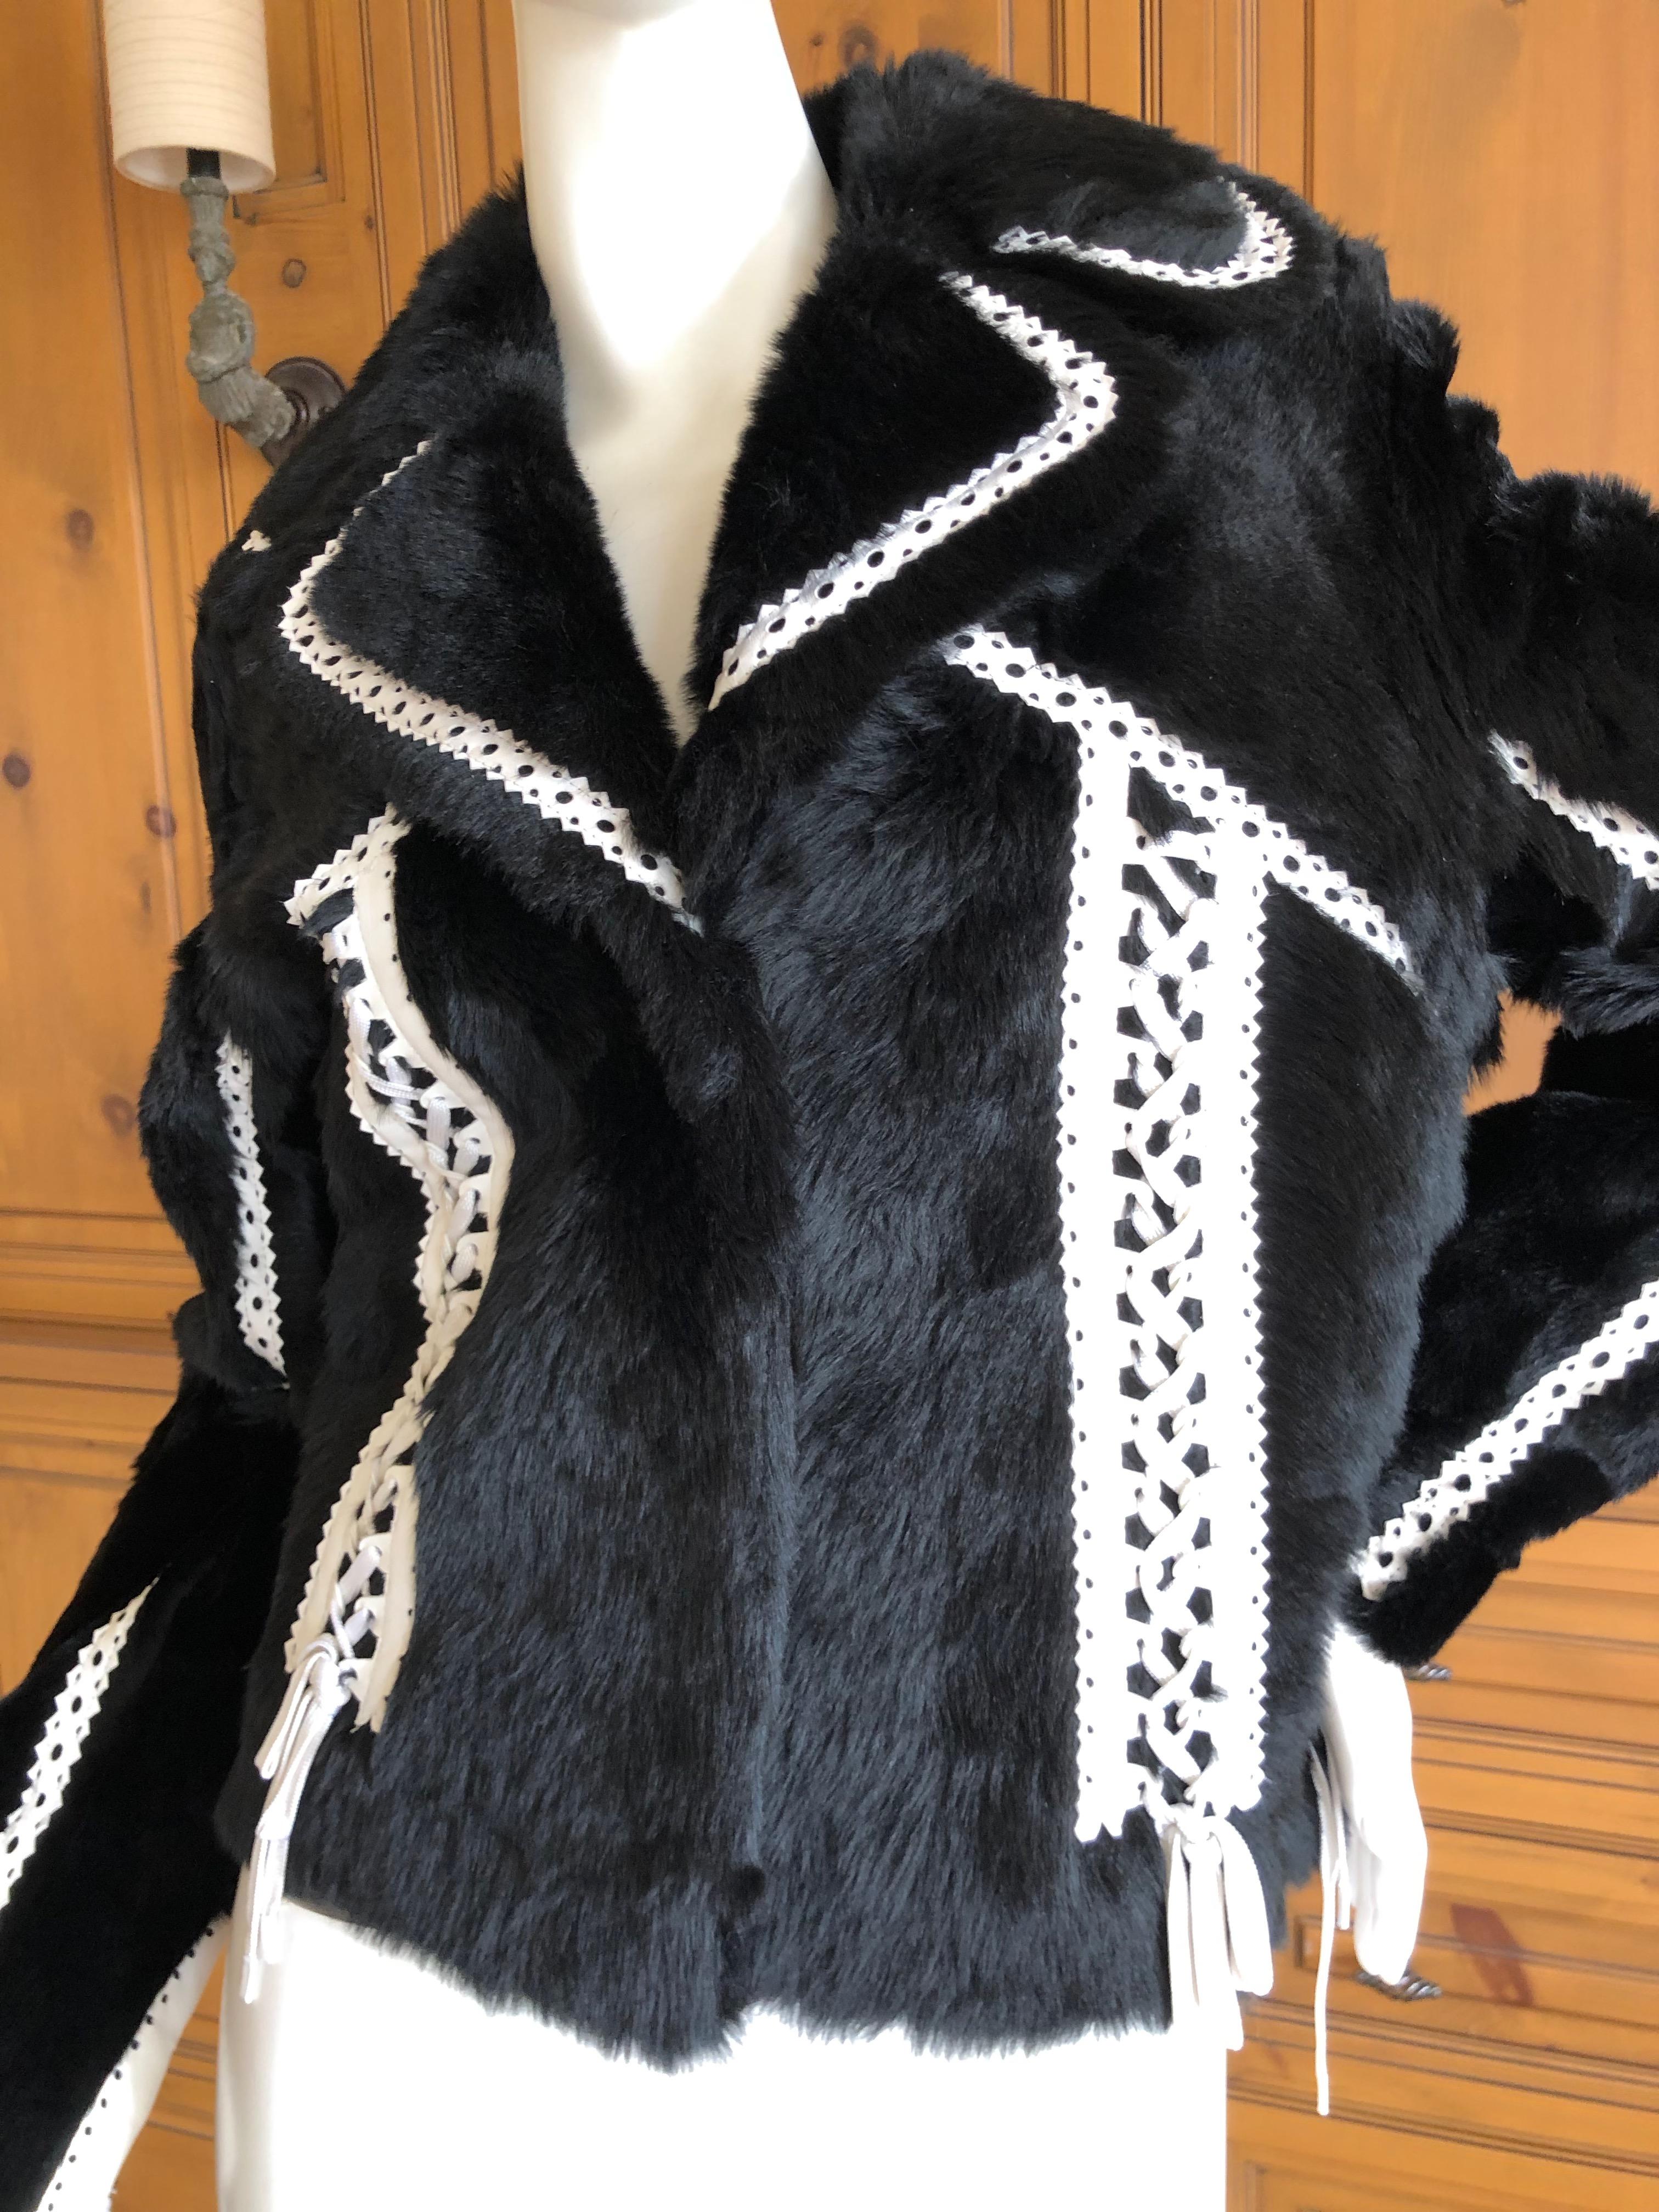 Christian Dior by John Galliano Black Fur Moto Jacket White Leather Lace Up Trim.
This is so wonderful, inside is leather, outside is black fur.
WHite leather trim with corset lacing.
Size 38
Bust 40